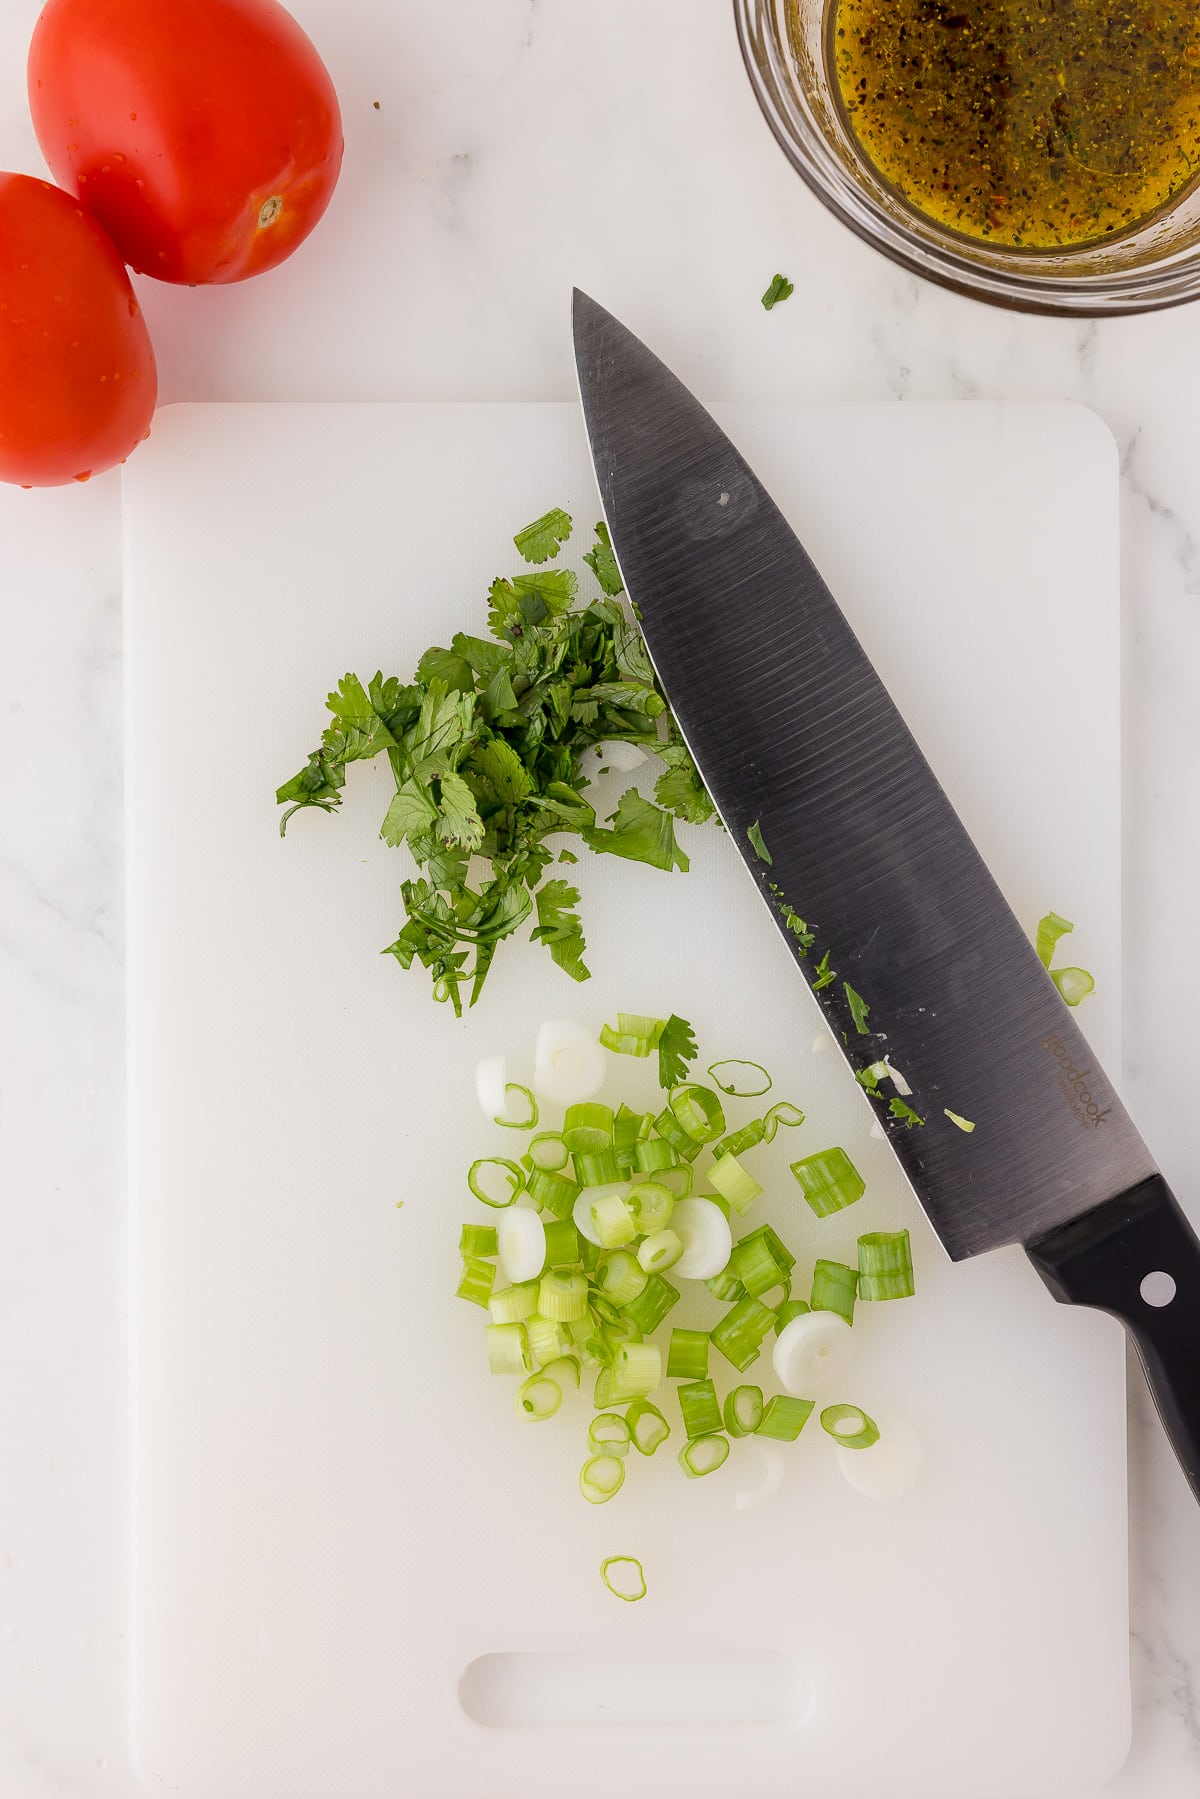 A large knife resting on a white cutting board with green onions and cilantro